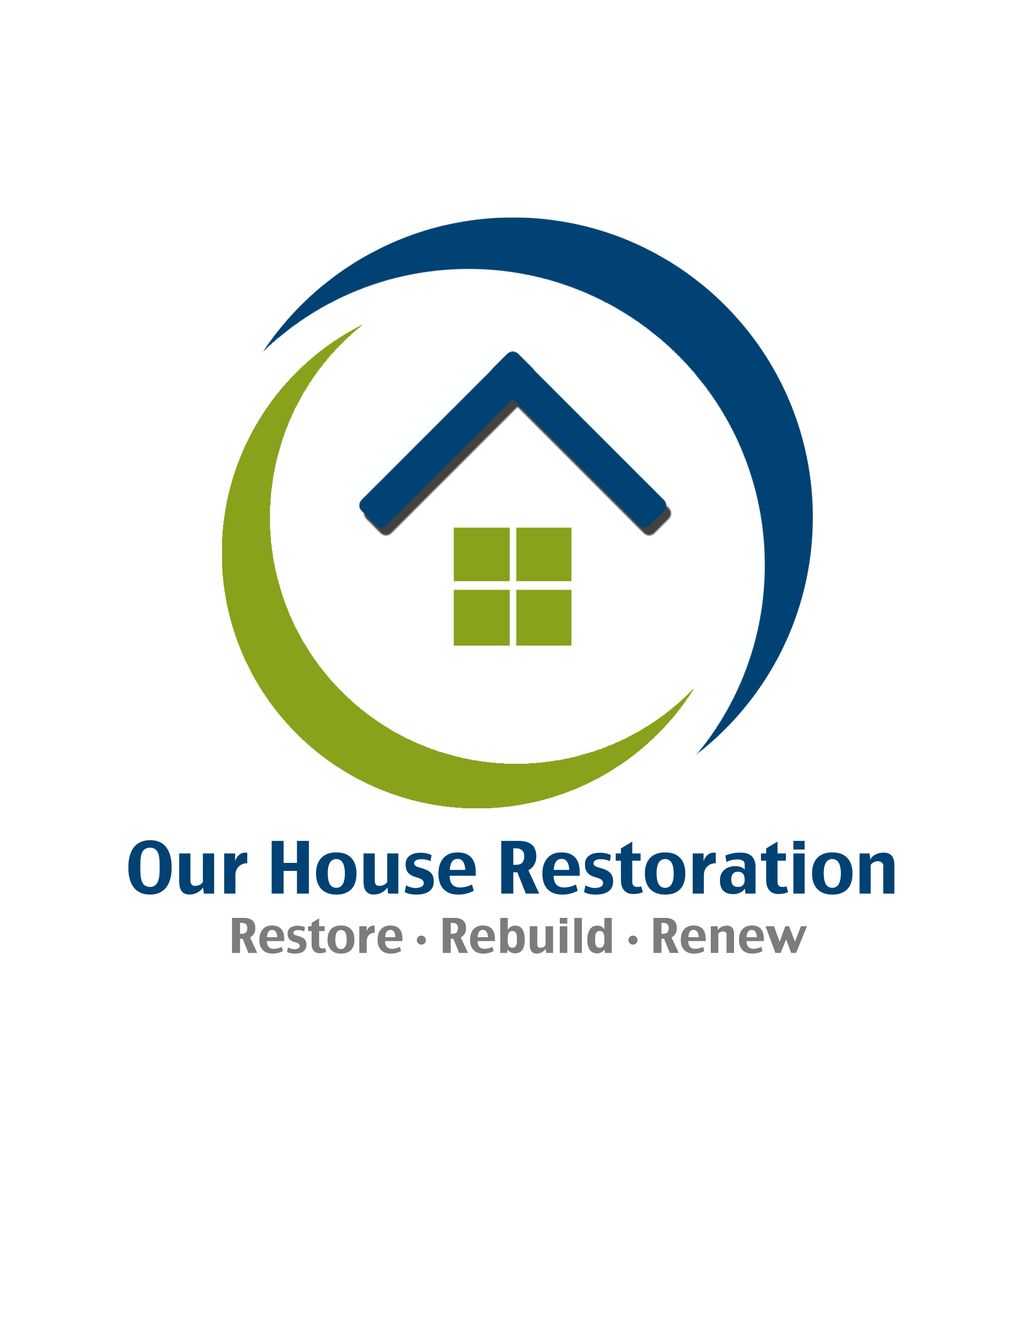 Our House Restoration